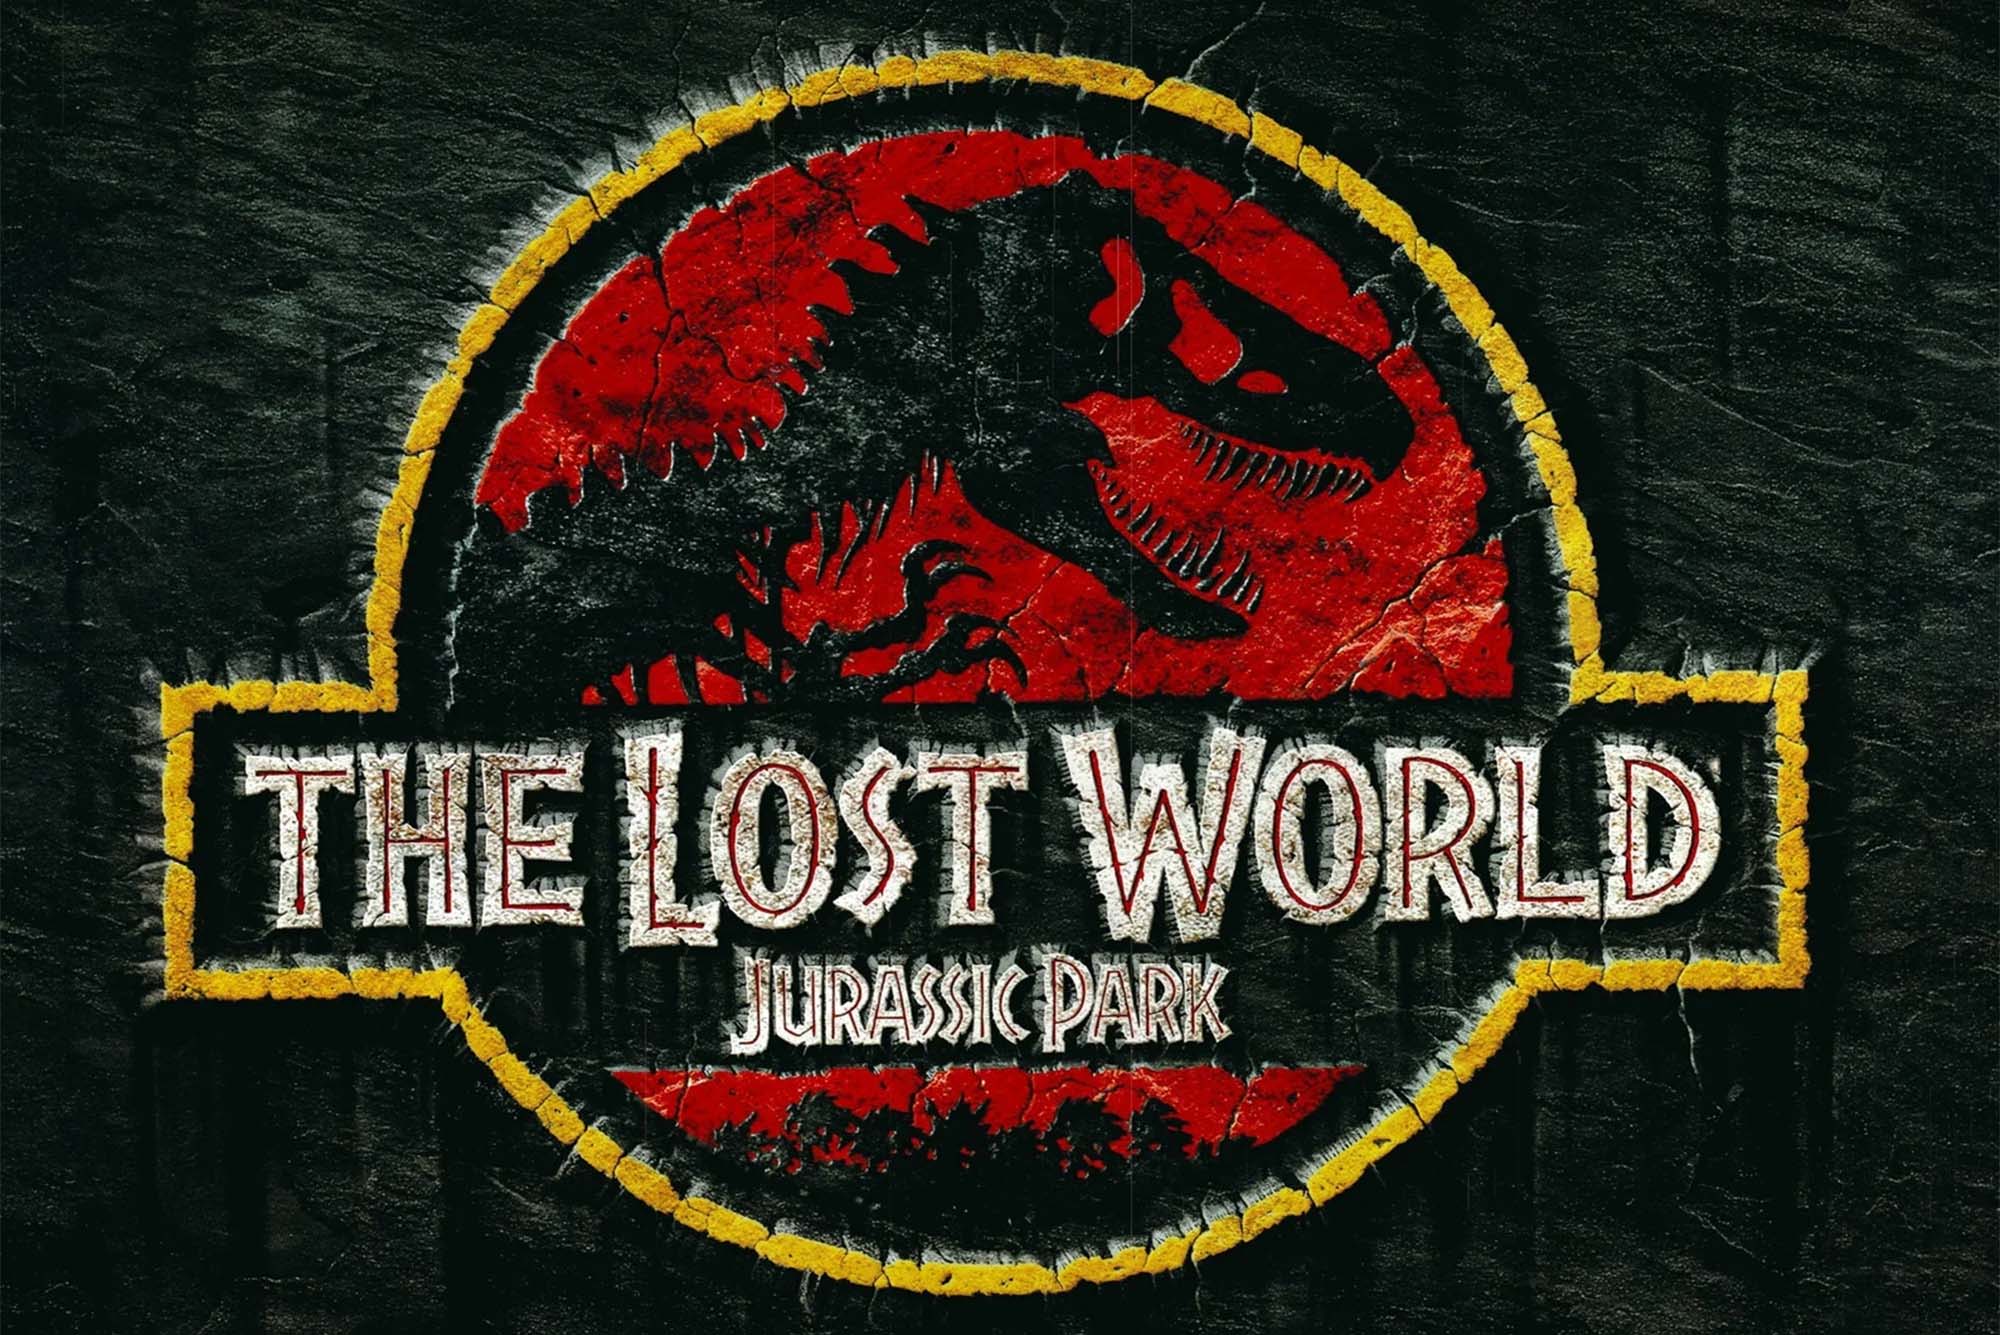 43-facts-about-the-movie-the-lost-world-jurassic-park